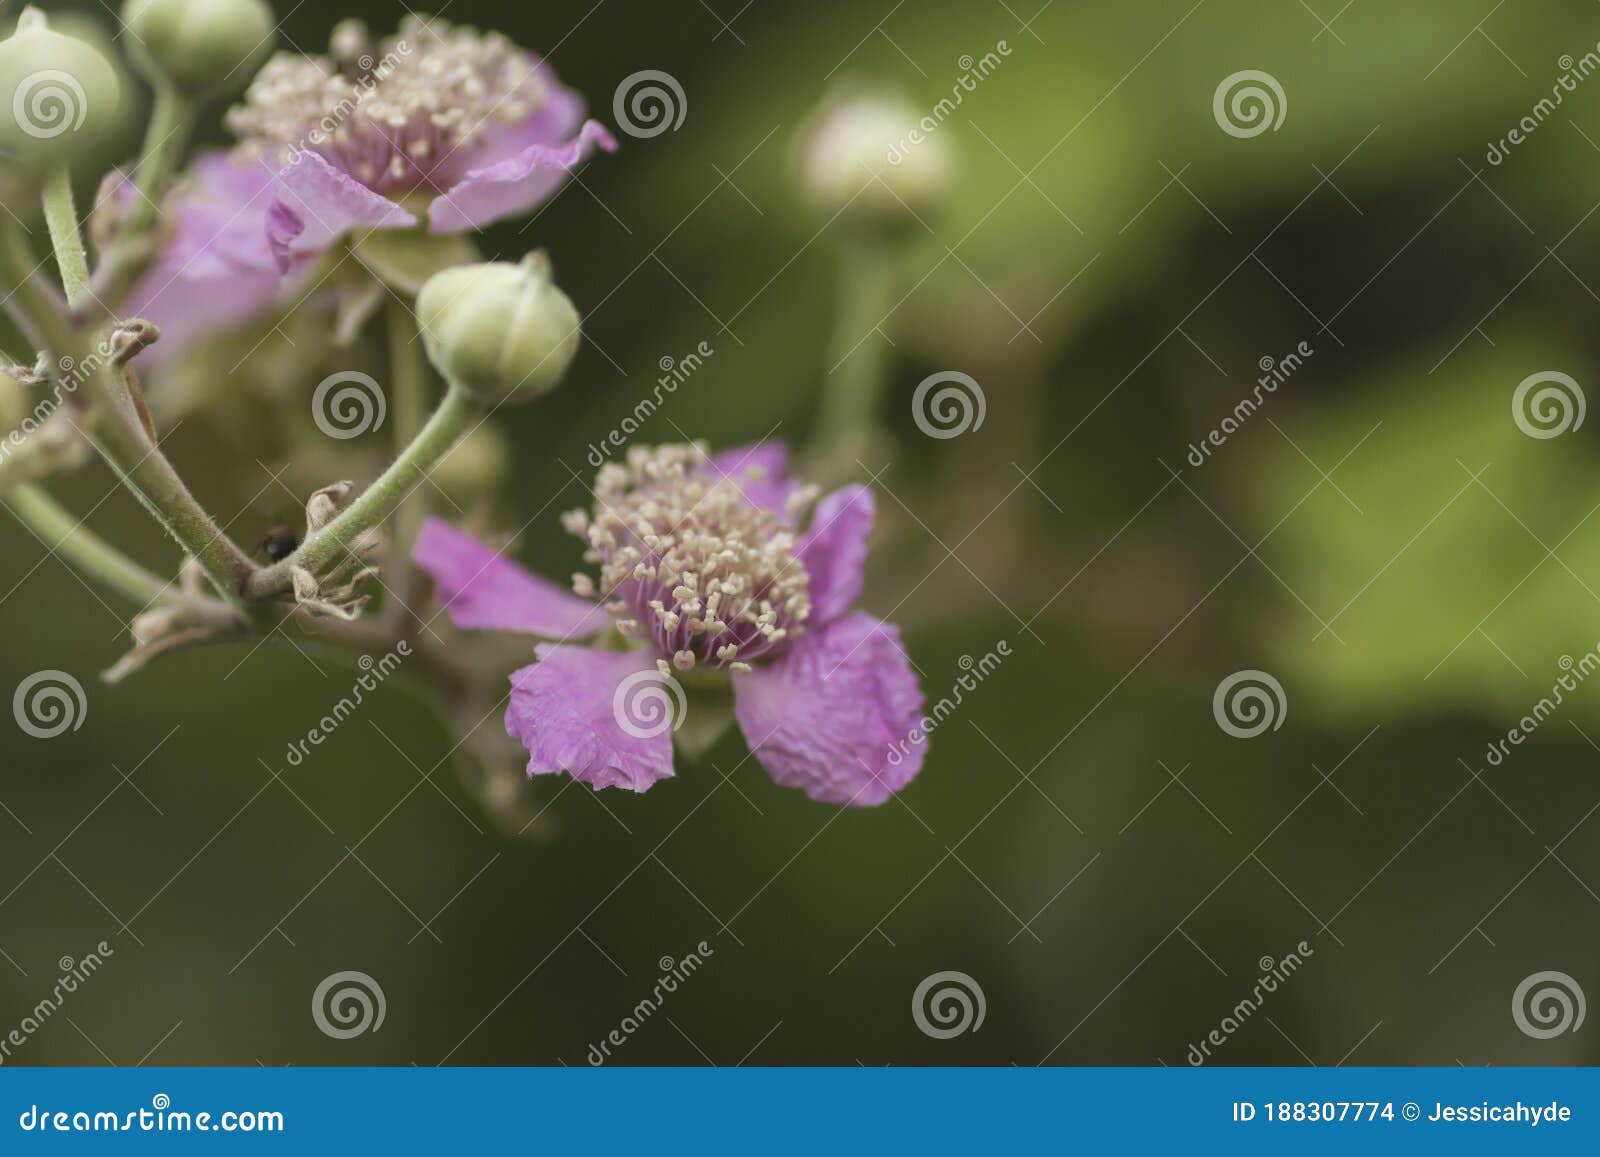 wild blackberry flowers and buds